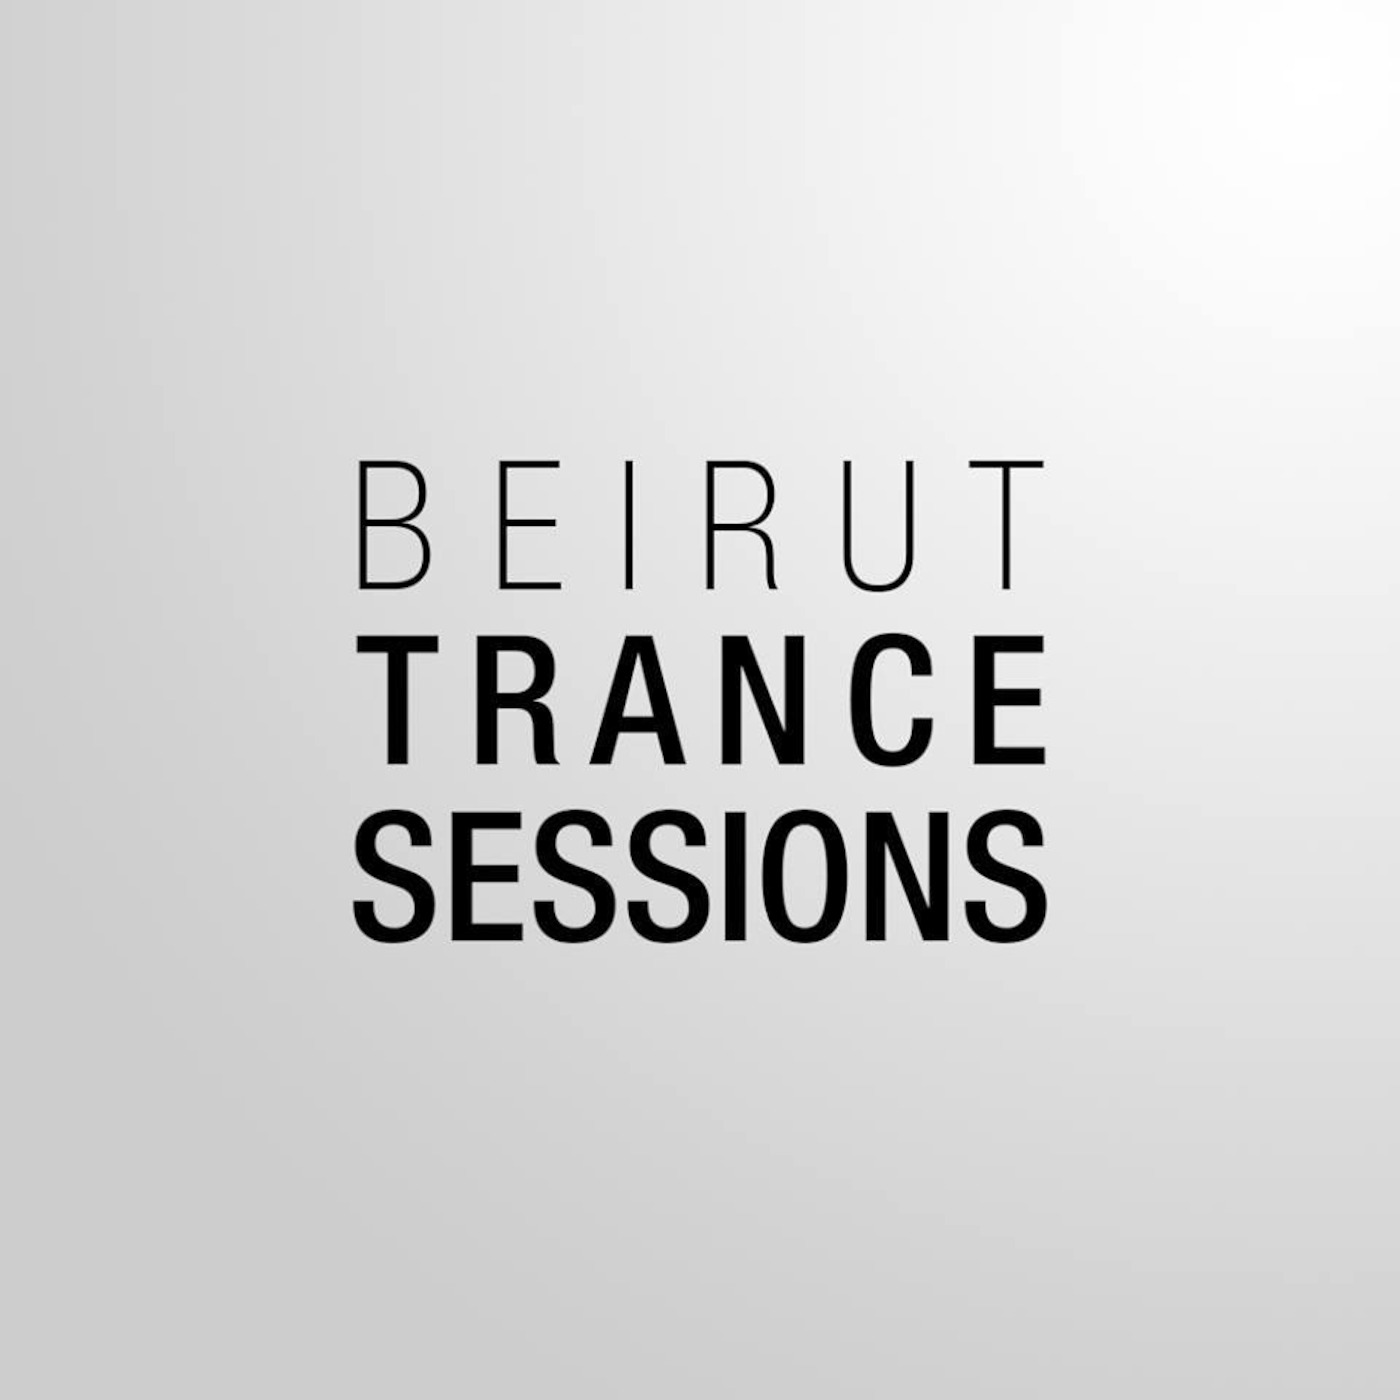 Beirut Trance Sessions